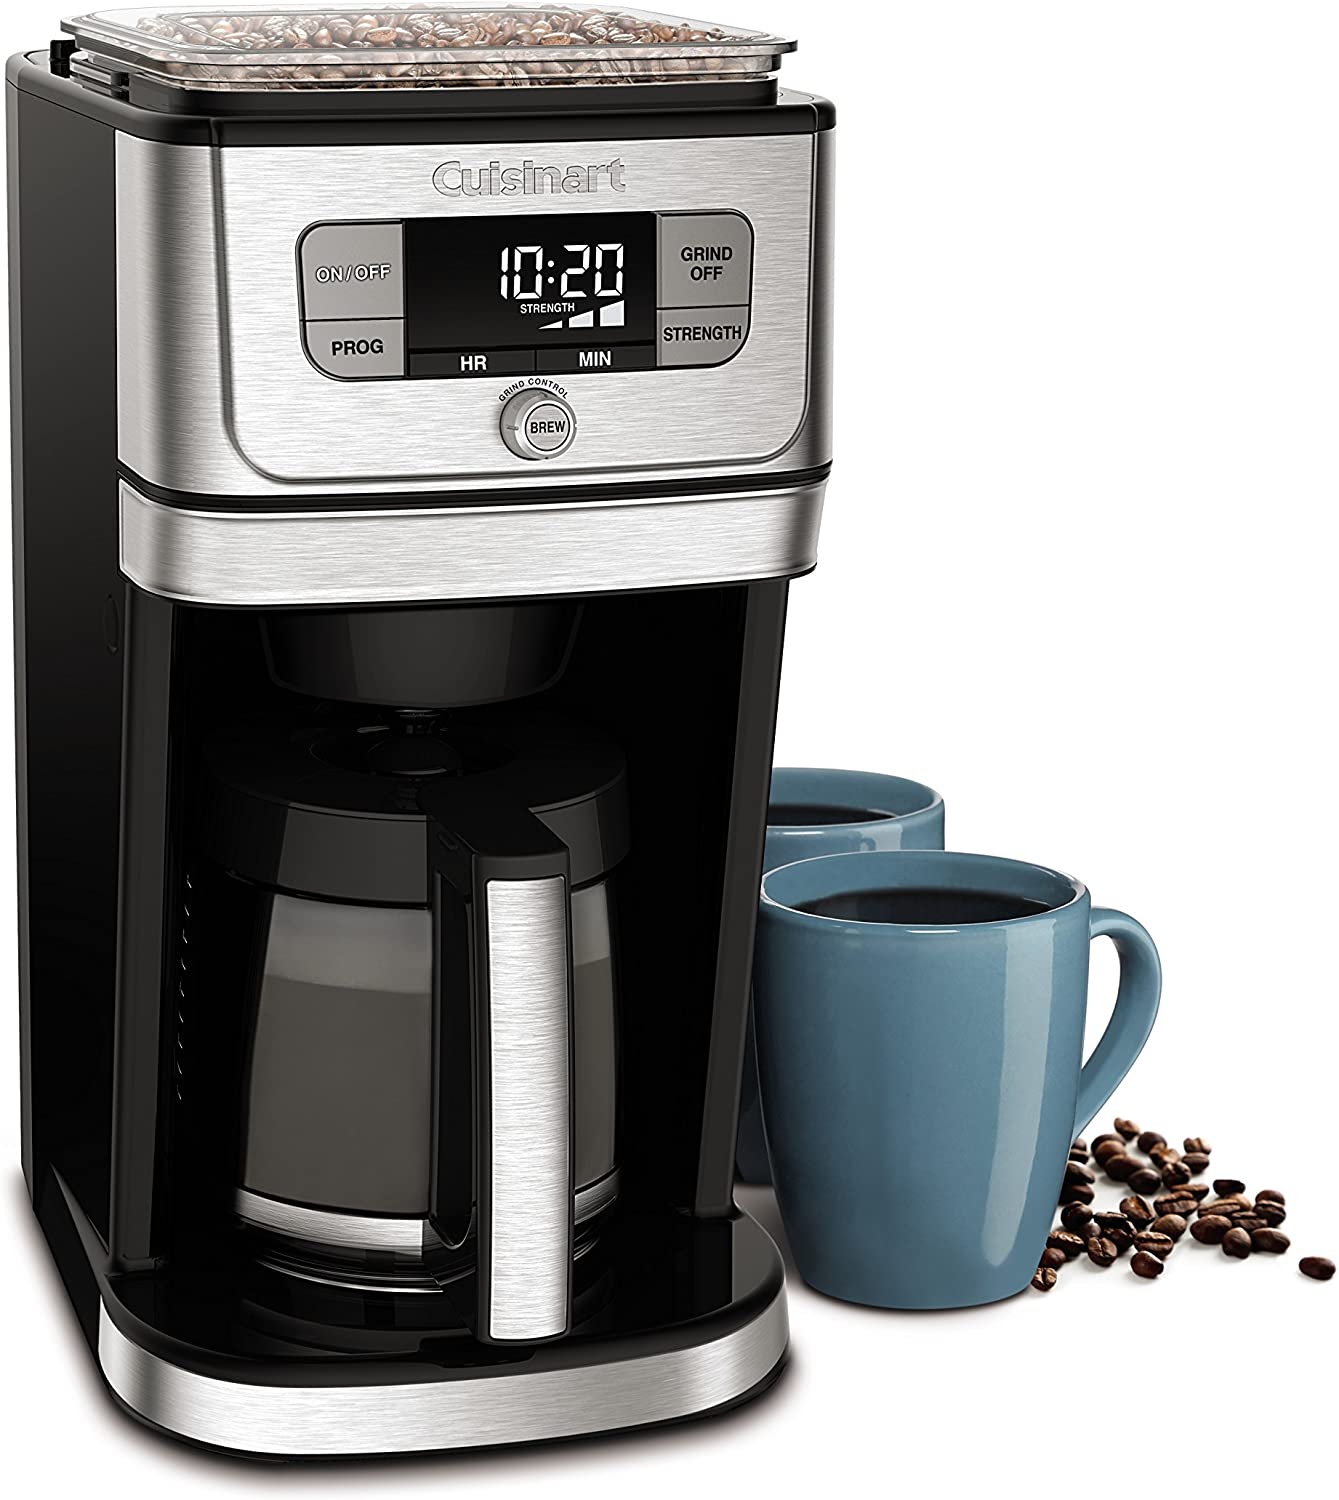 Cuisinart DGB-800FR Fully Automatic 12 Cup Burr Grind & Brew Glass Coffeemaker Silver - Certified Refurbished